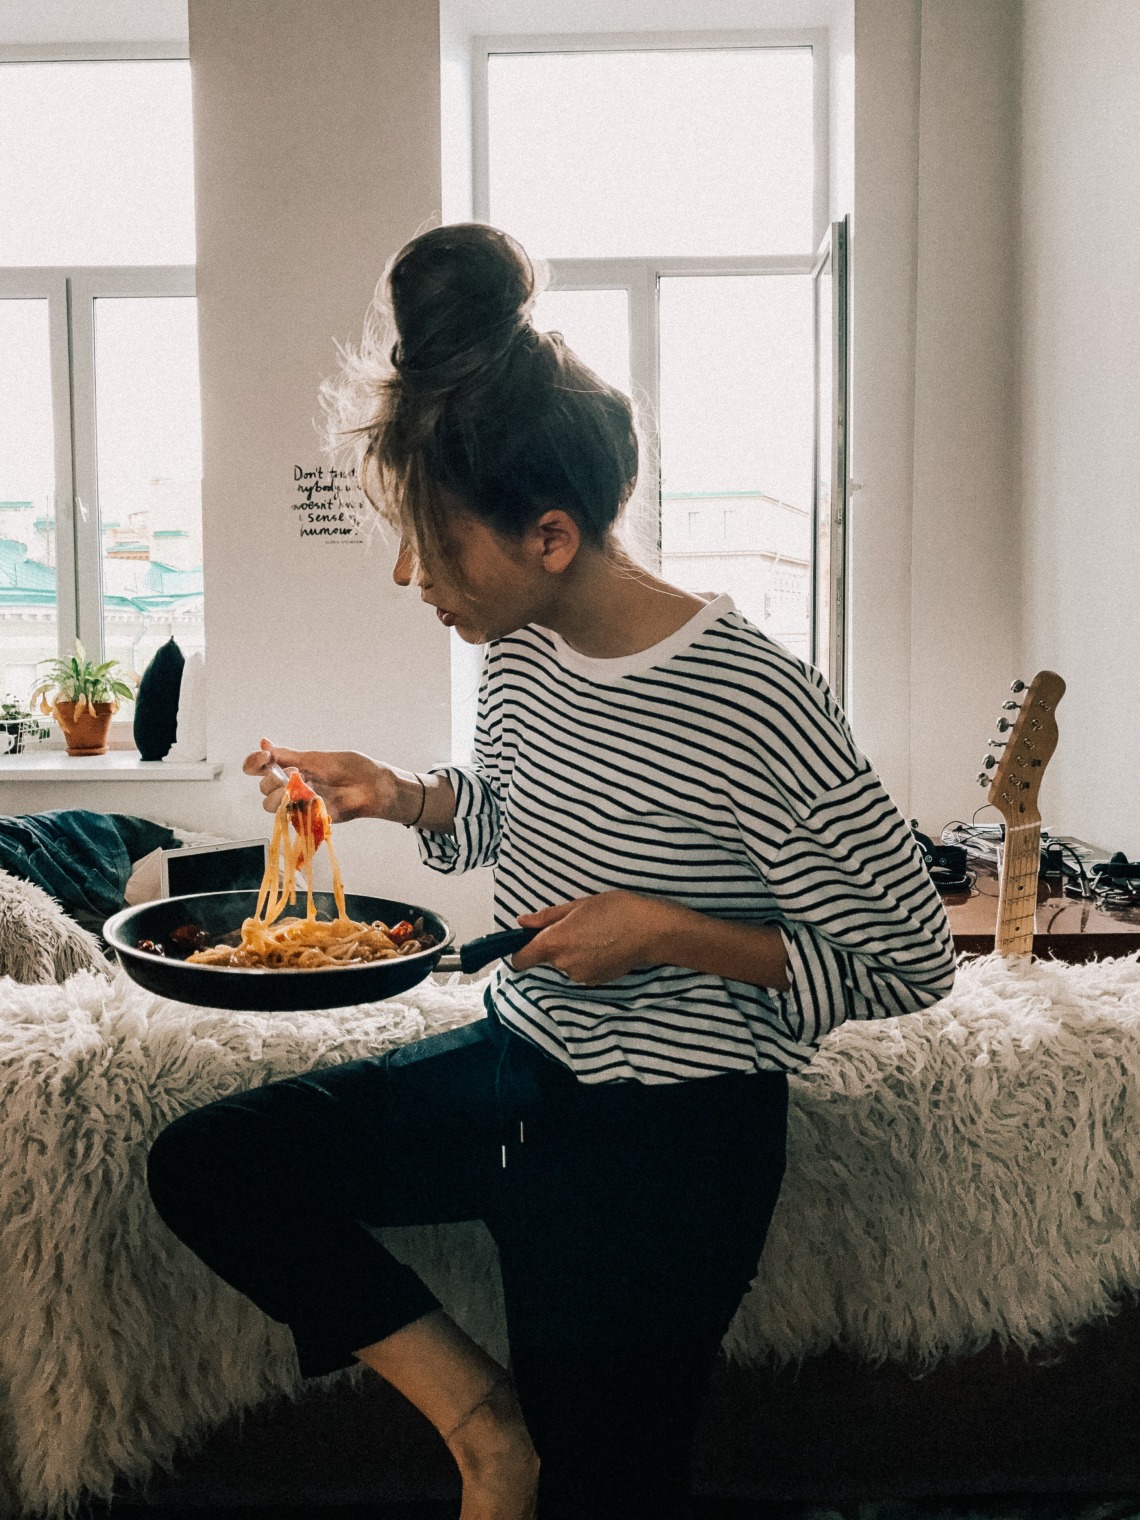 women in striped shirt eating pasta in apartment